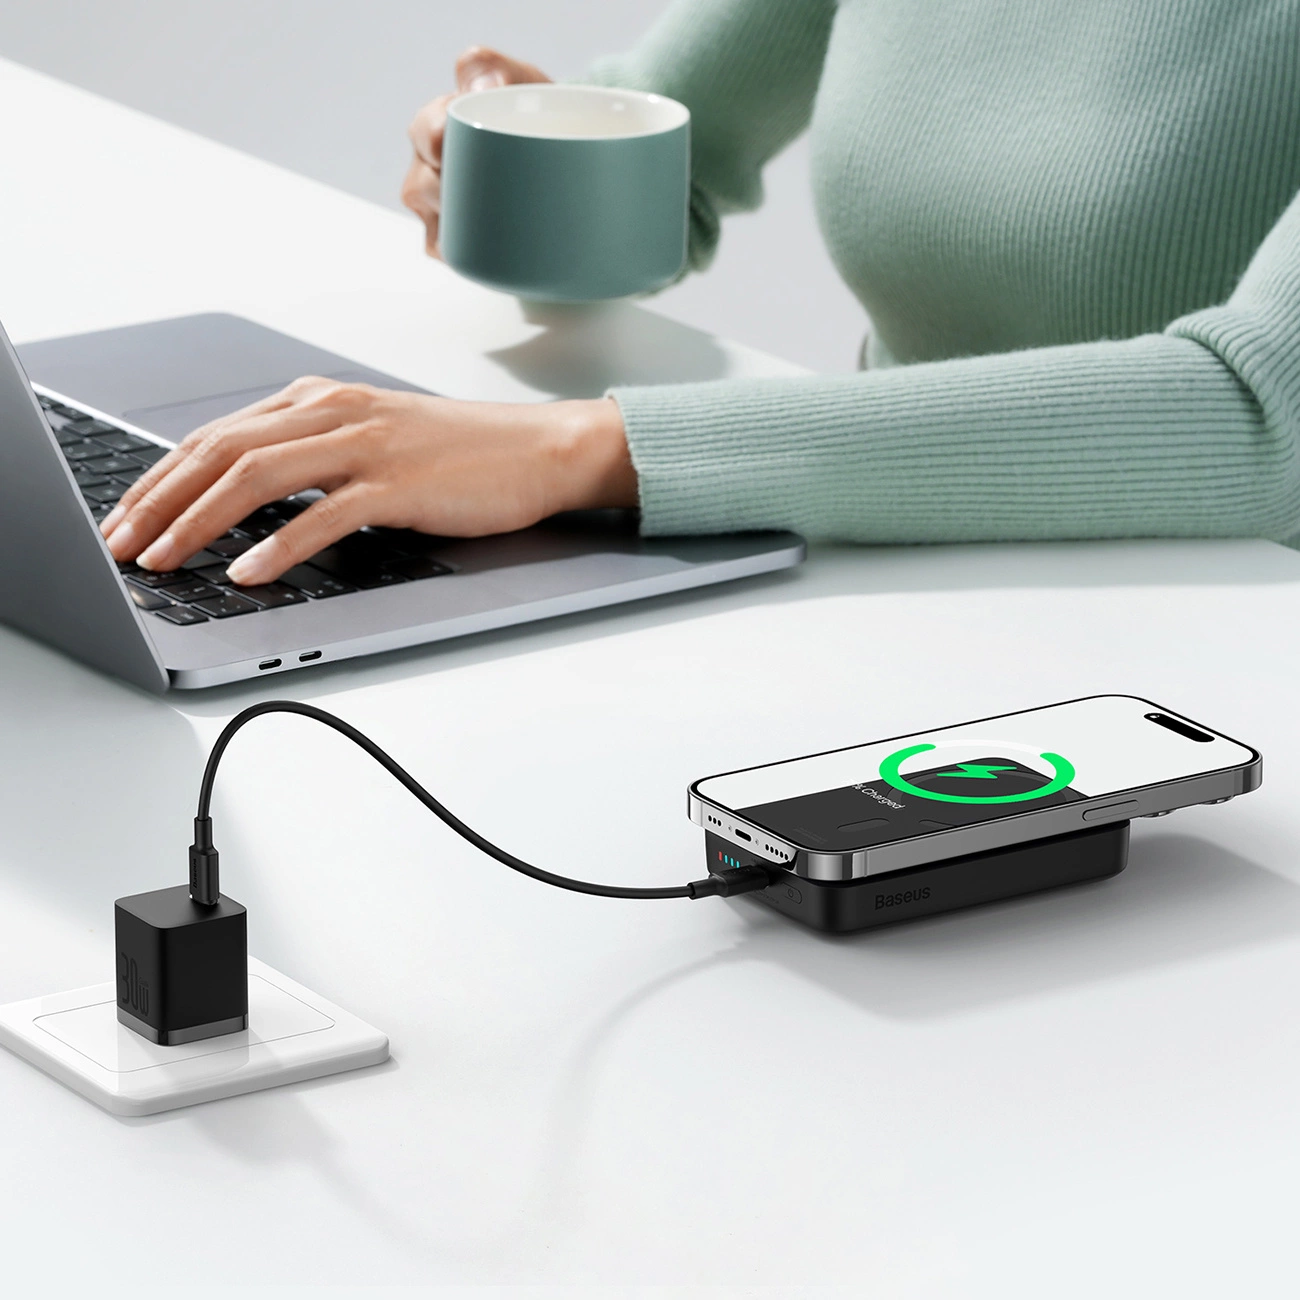 The Baseus Magnetic Mini powerbank in an office setting lies next to the laptop on the desk and is connected to the socket via a cable, and there is a phone on it that is being charged.